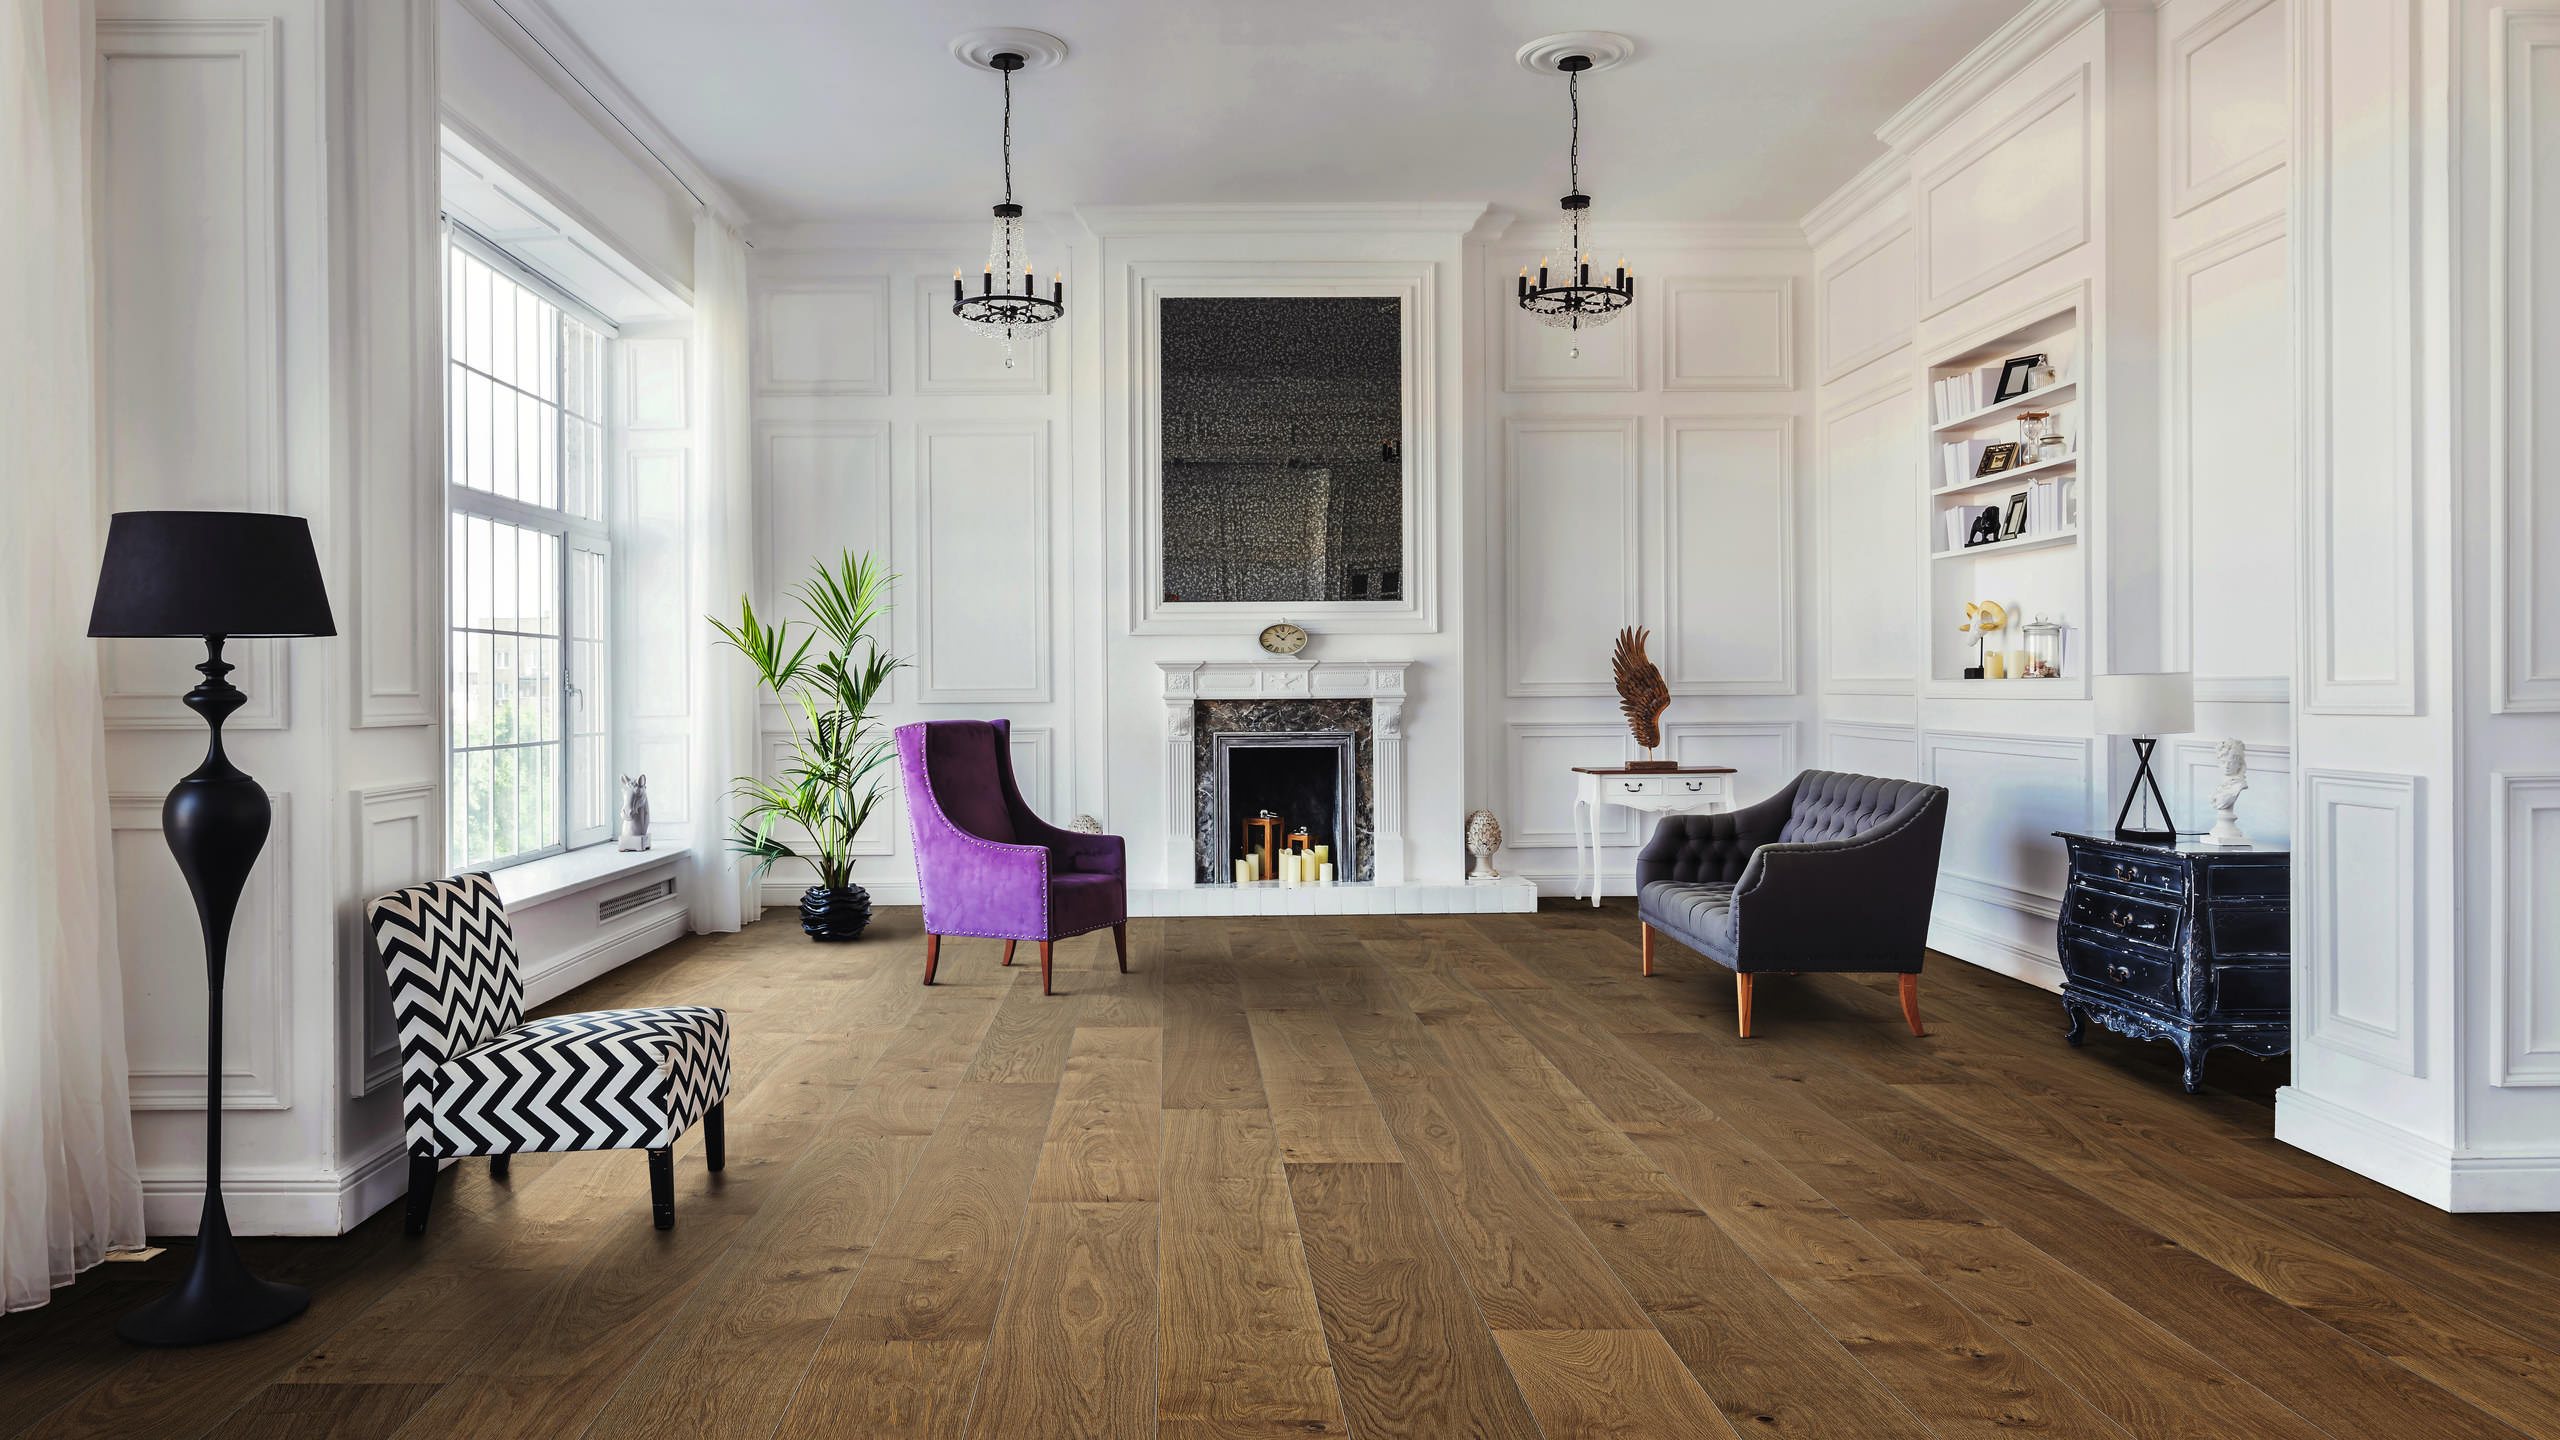 HARO PARQUET 4000 Plank 1-Strip Plaza 240 4V Smoked Oak Markant brushed naturaLin plus Top Connect